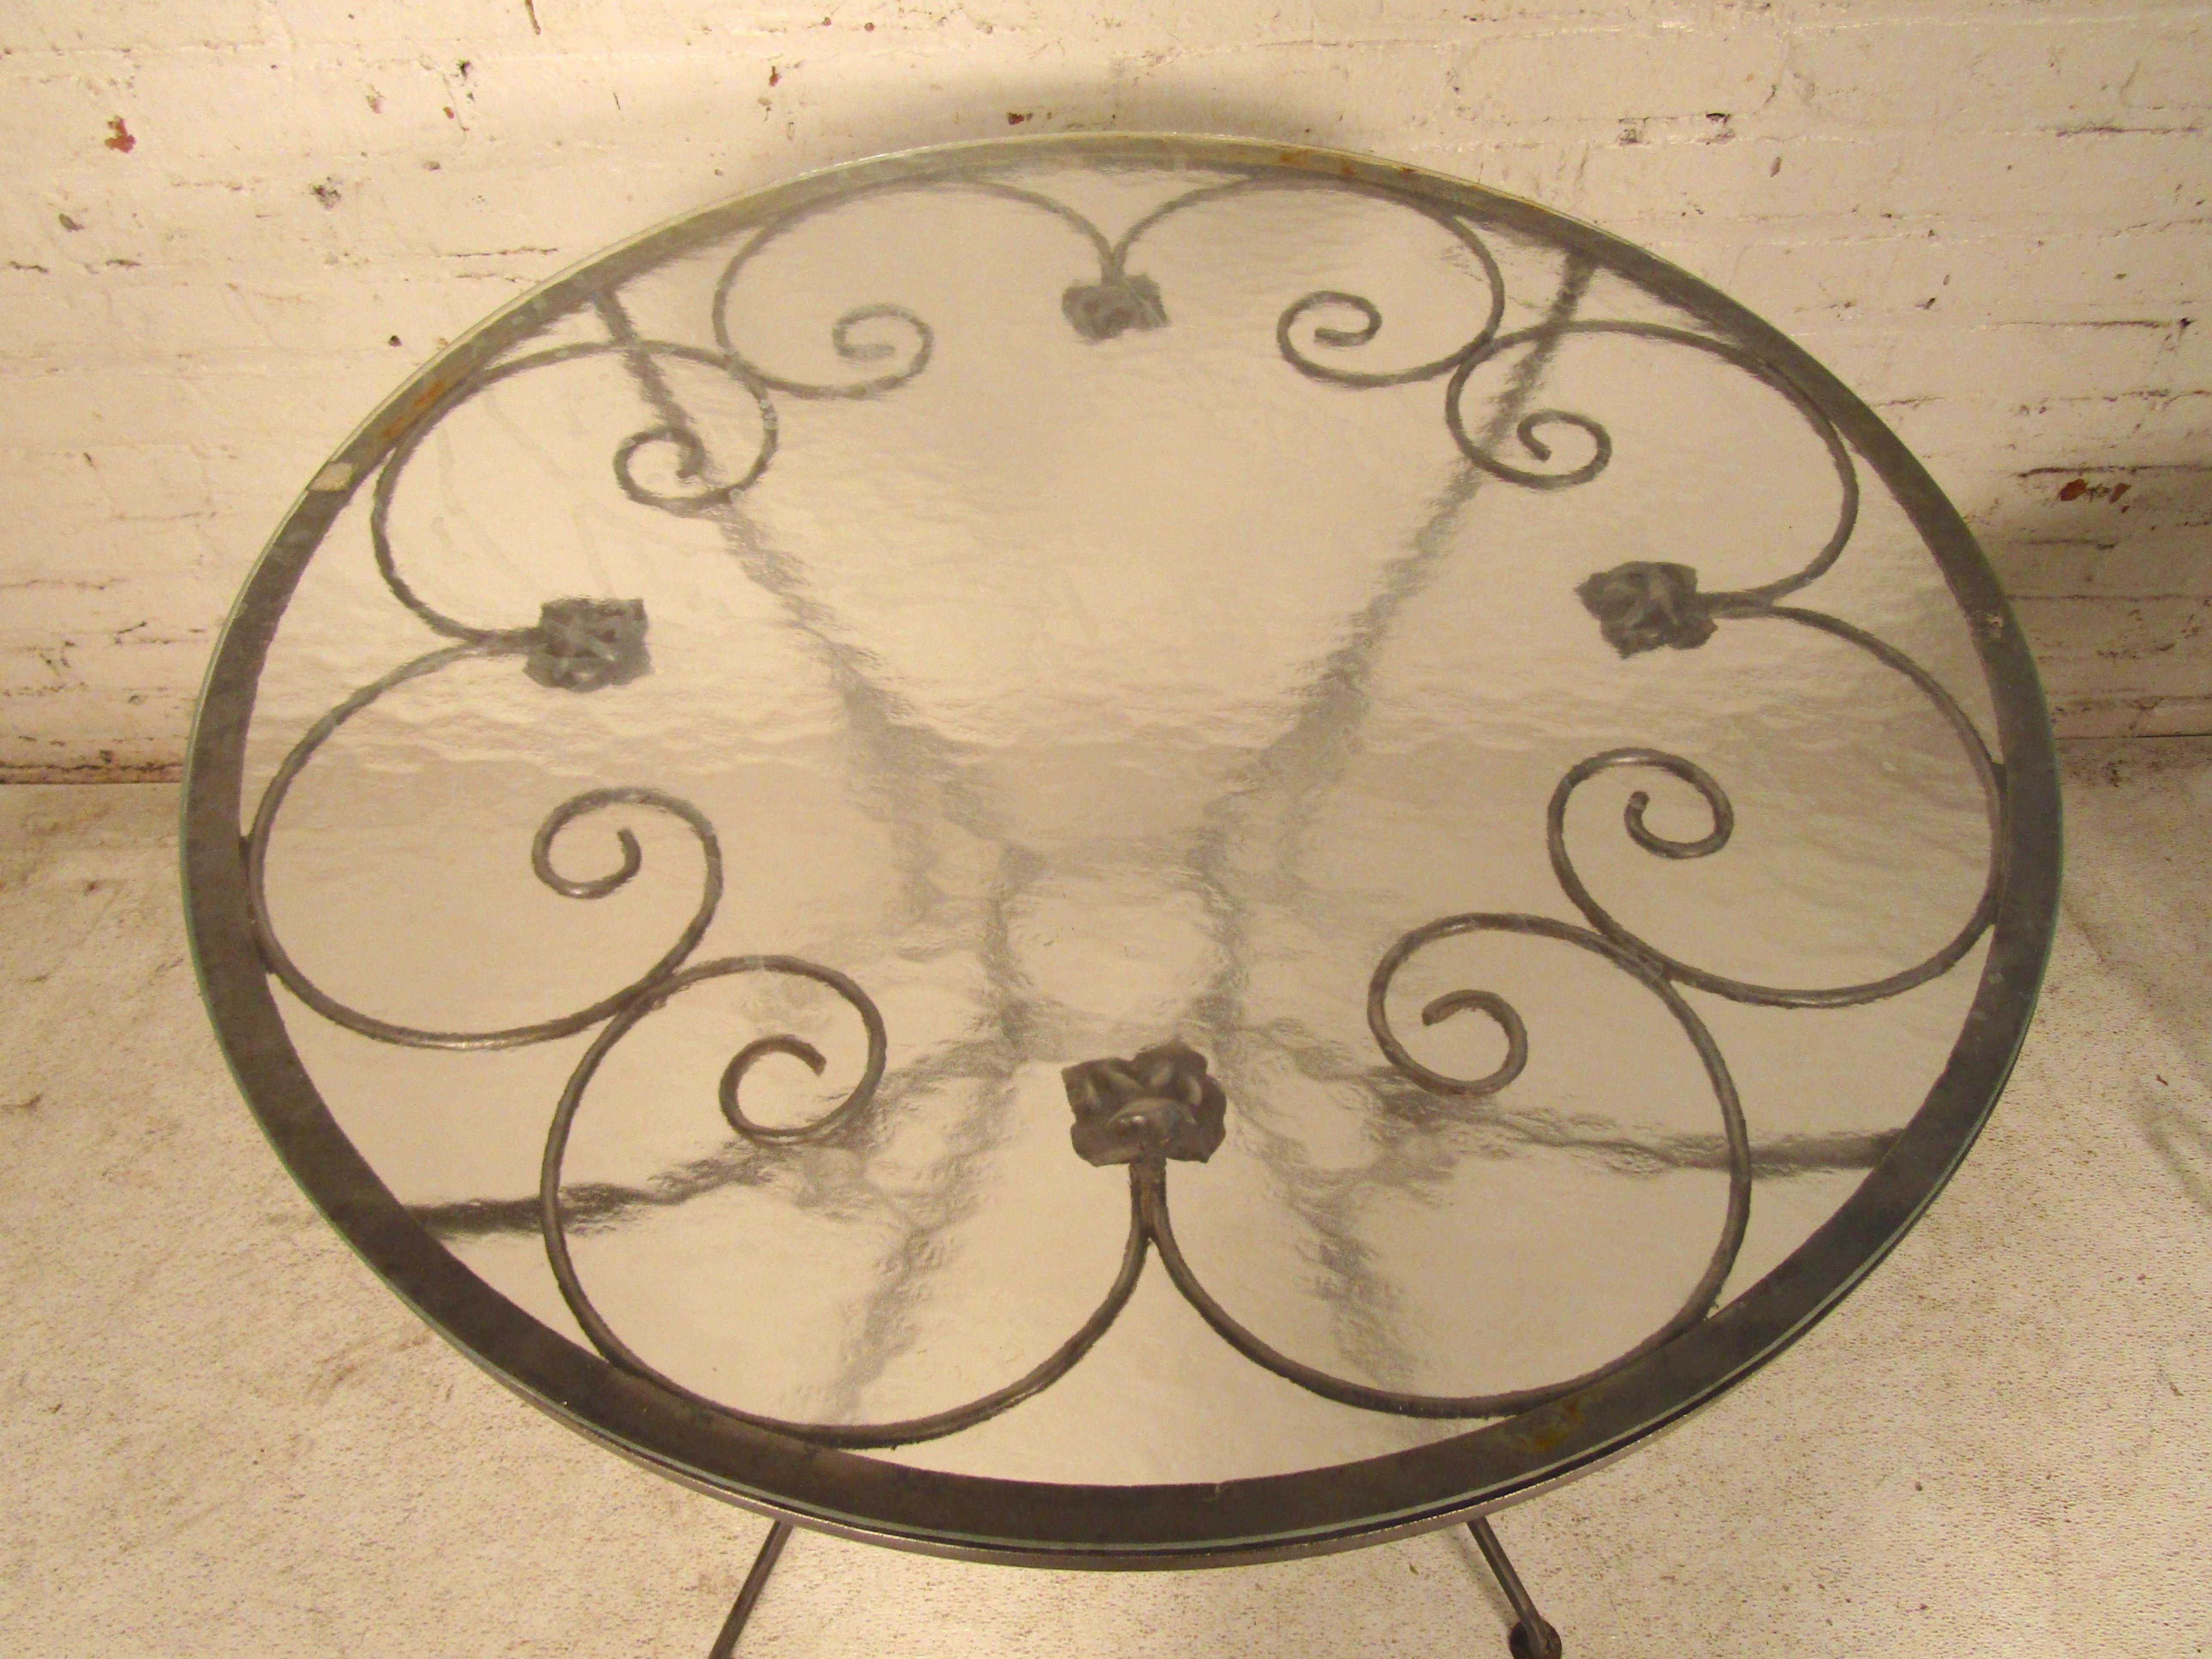 Metal patio table with glass. Attractive detailing and slender lines throughout. Refinished in a bare metal style finish.
(Please confirm item location - NY or NJ - with dealer).
 